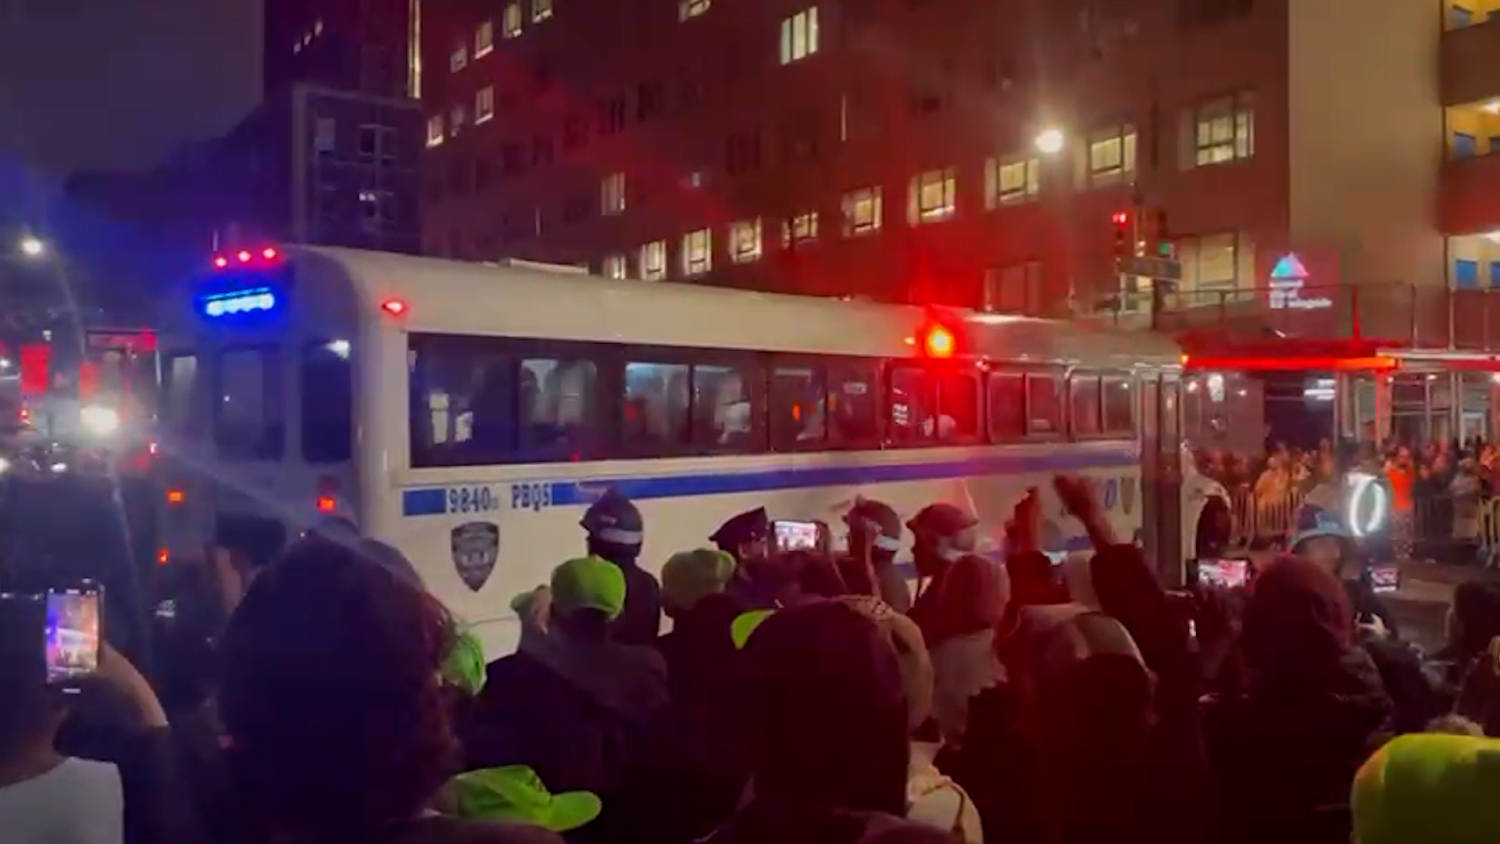 Bus full of detained protesters leaves Columbia's campus